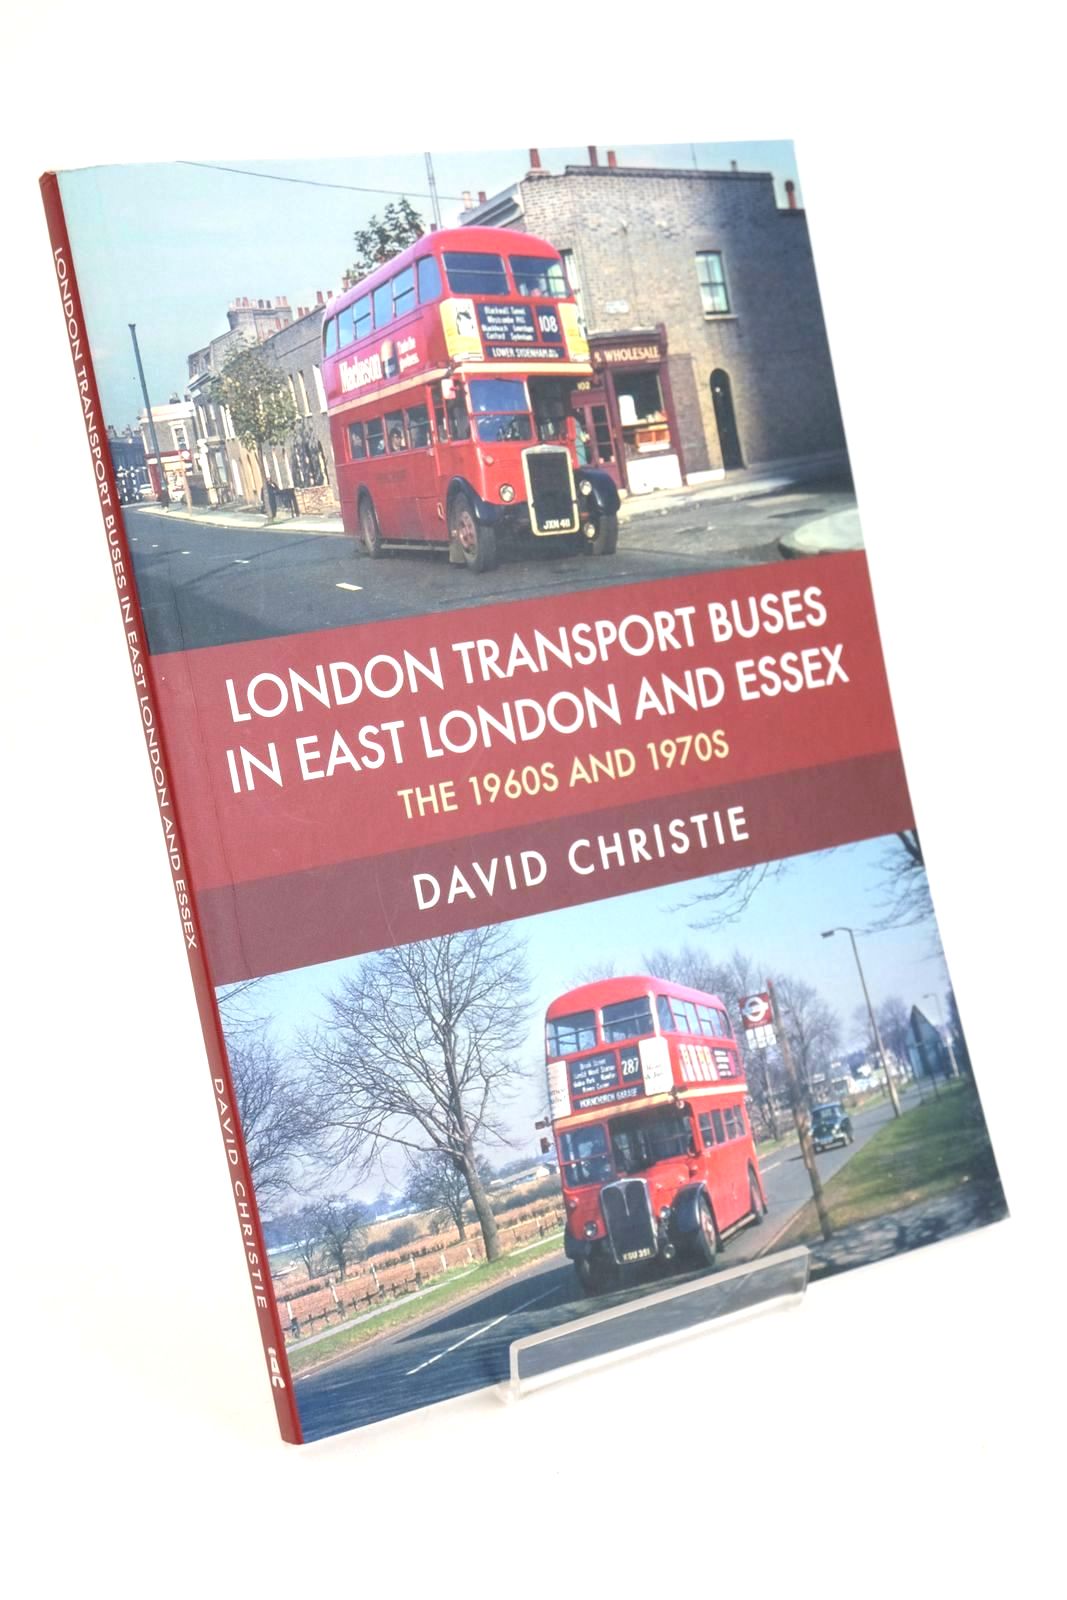 Photo of LONDON TRANSPORT BUSES IN EAST LONDON AND ESSEX: THE 1960S AND 1970S written by Christie, David published by Amberley Publishing (STOCK CODE: 1326979)  for sale by Stella & Rose's Books